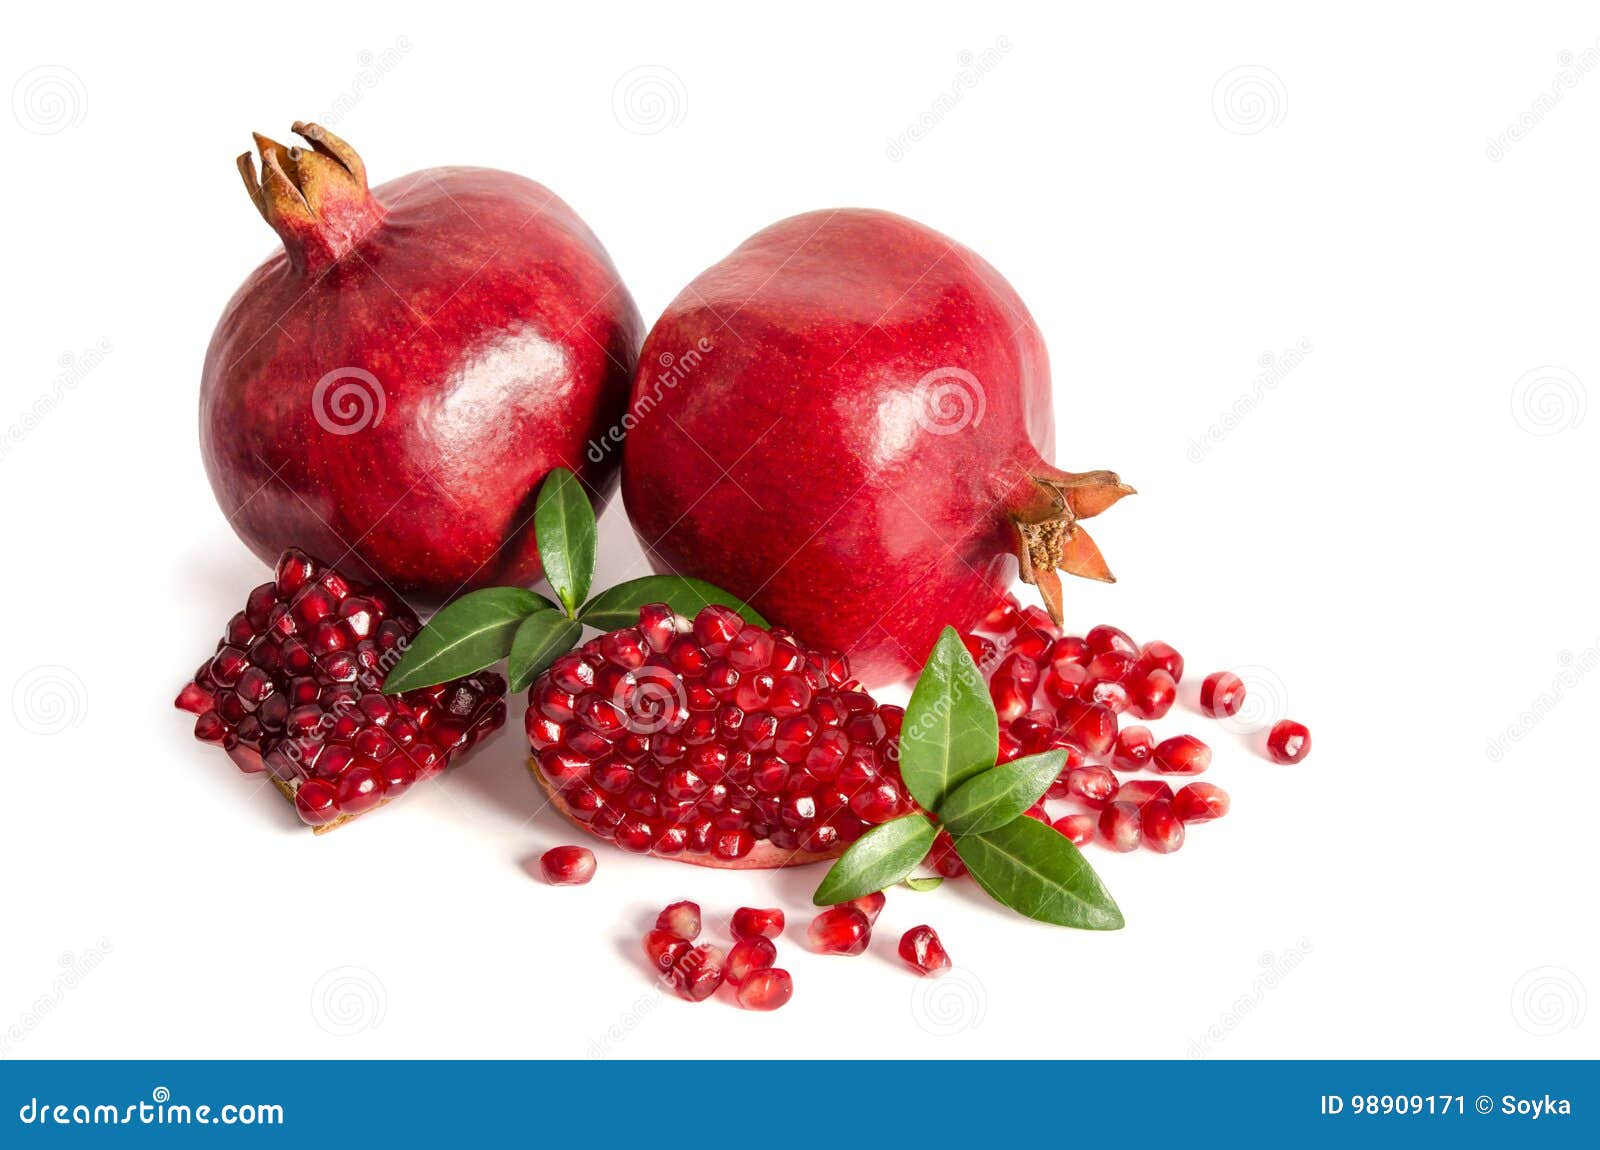 two whole and part of a pomegranate with pomegranate seeds